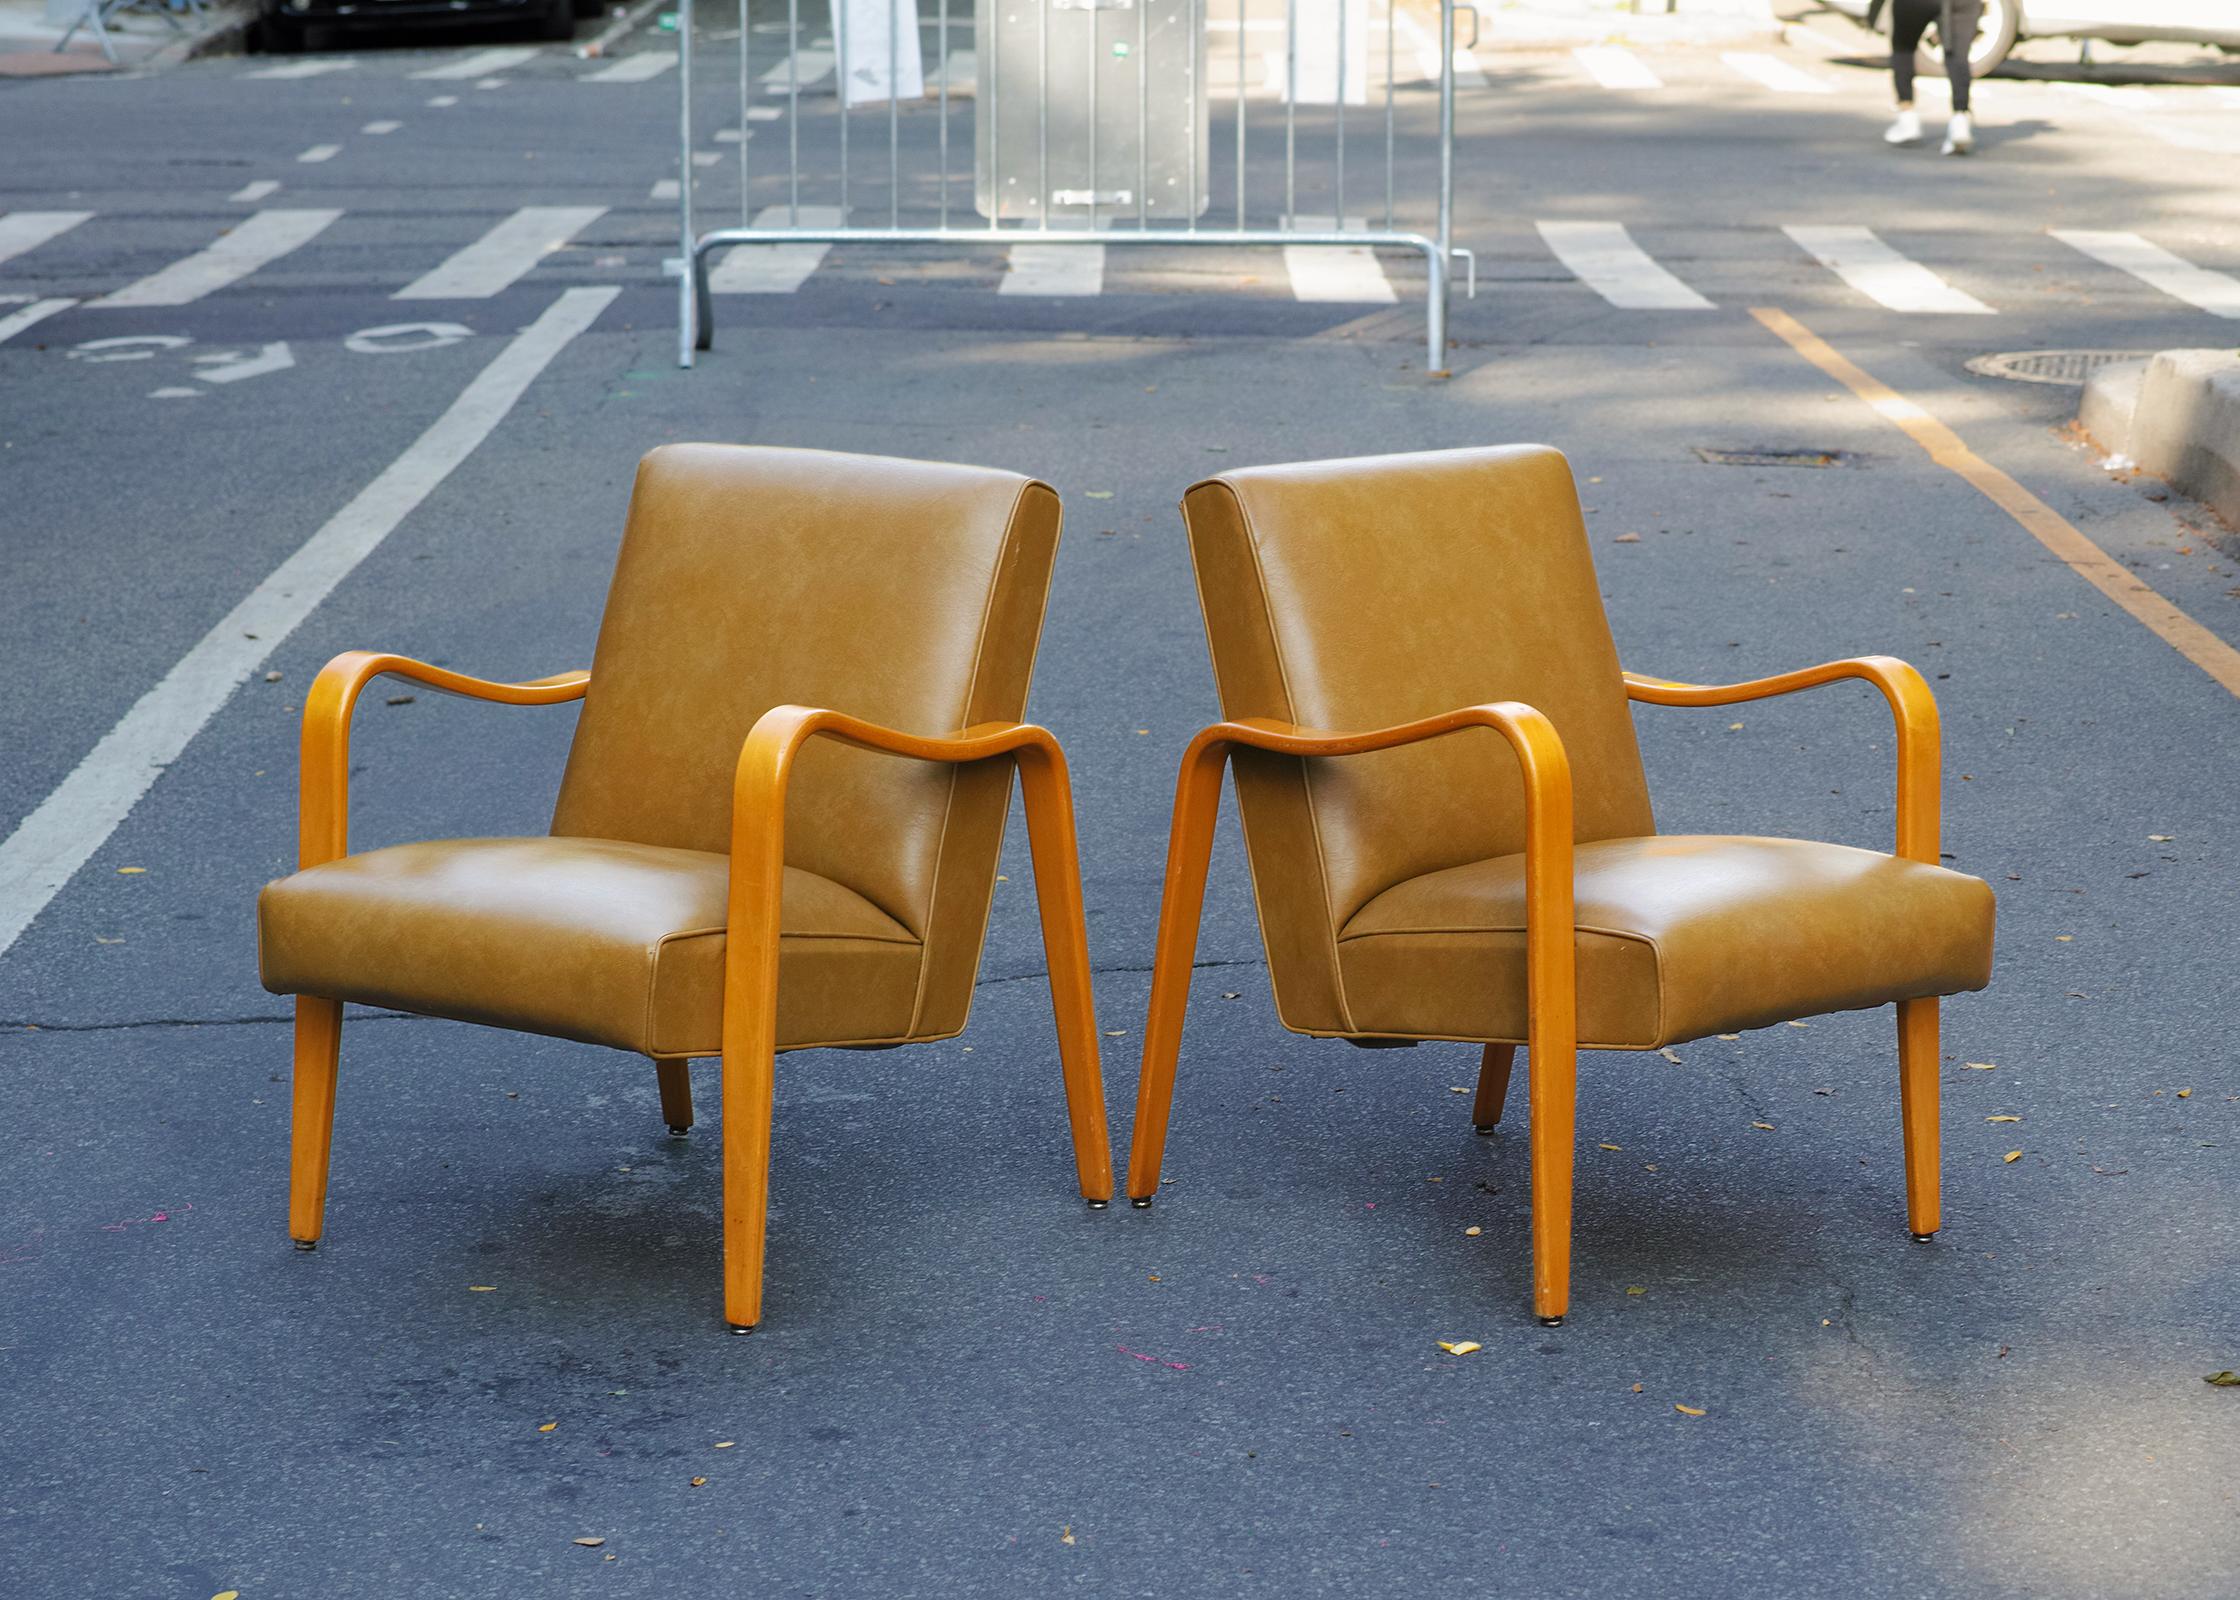 For your consideration is this pair of lounge chairs by Thonet dating from the 1960s with their original vinyl upholstery and original wood finish. The arms and legs are formed by a single piece of steam bent laminated wood that create a